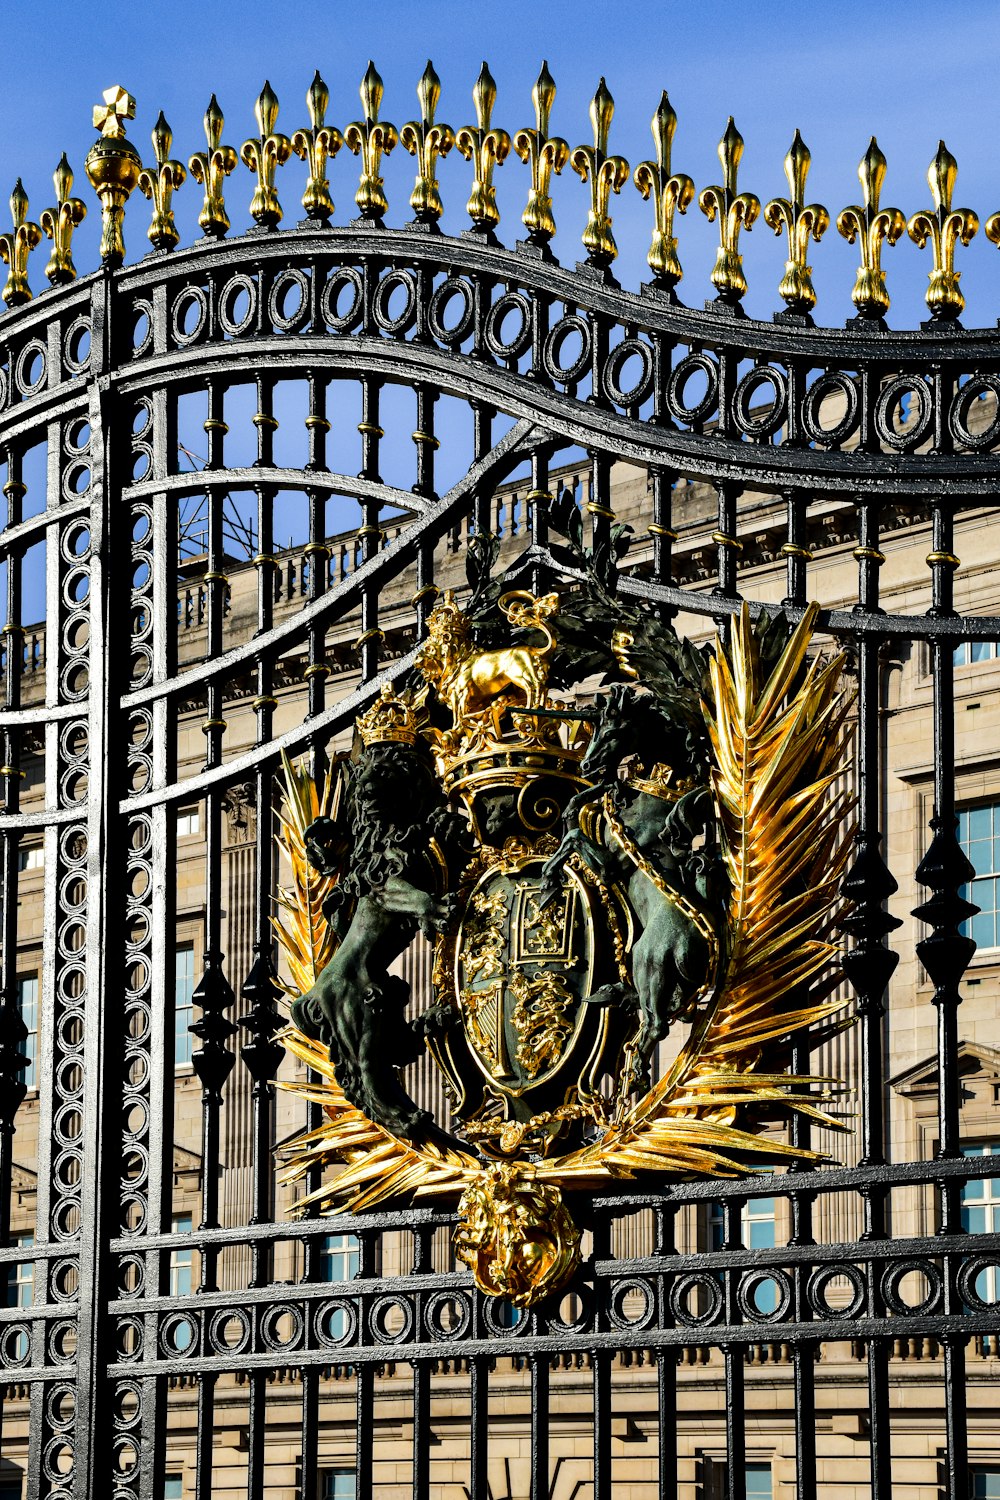 a large metal gate with a coat of arms on it